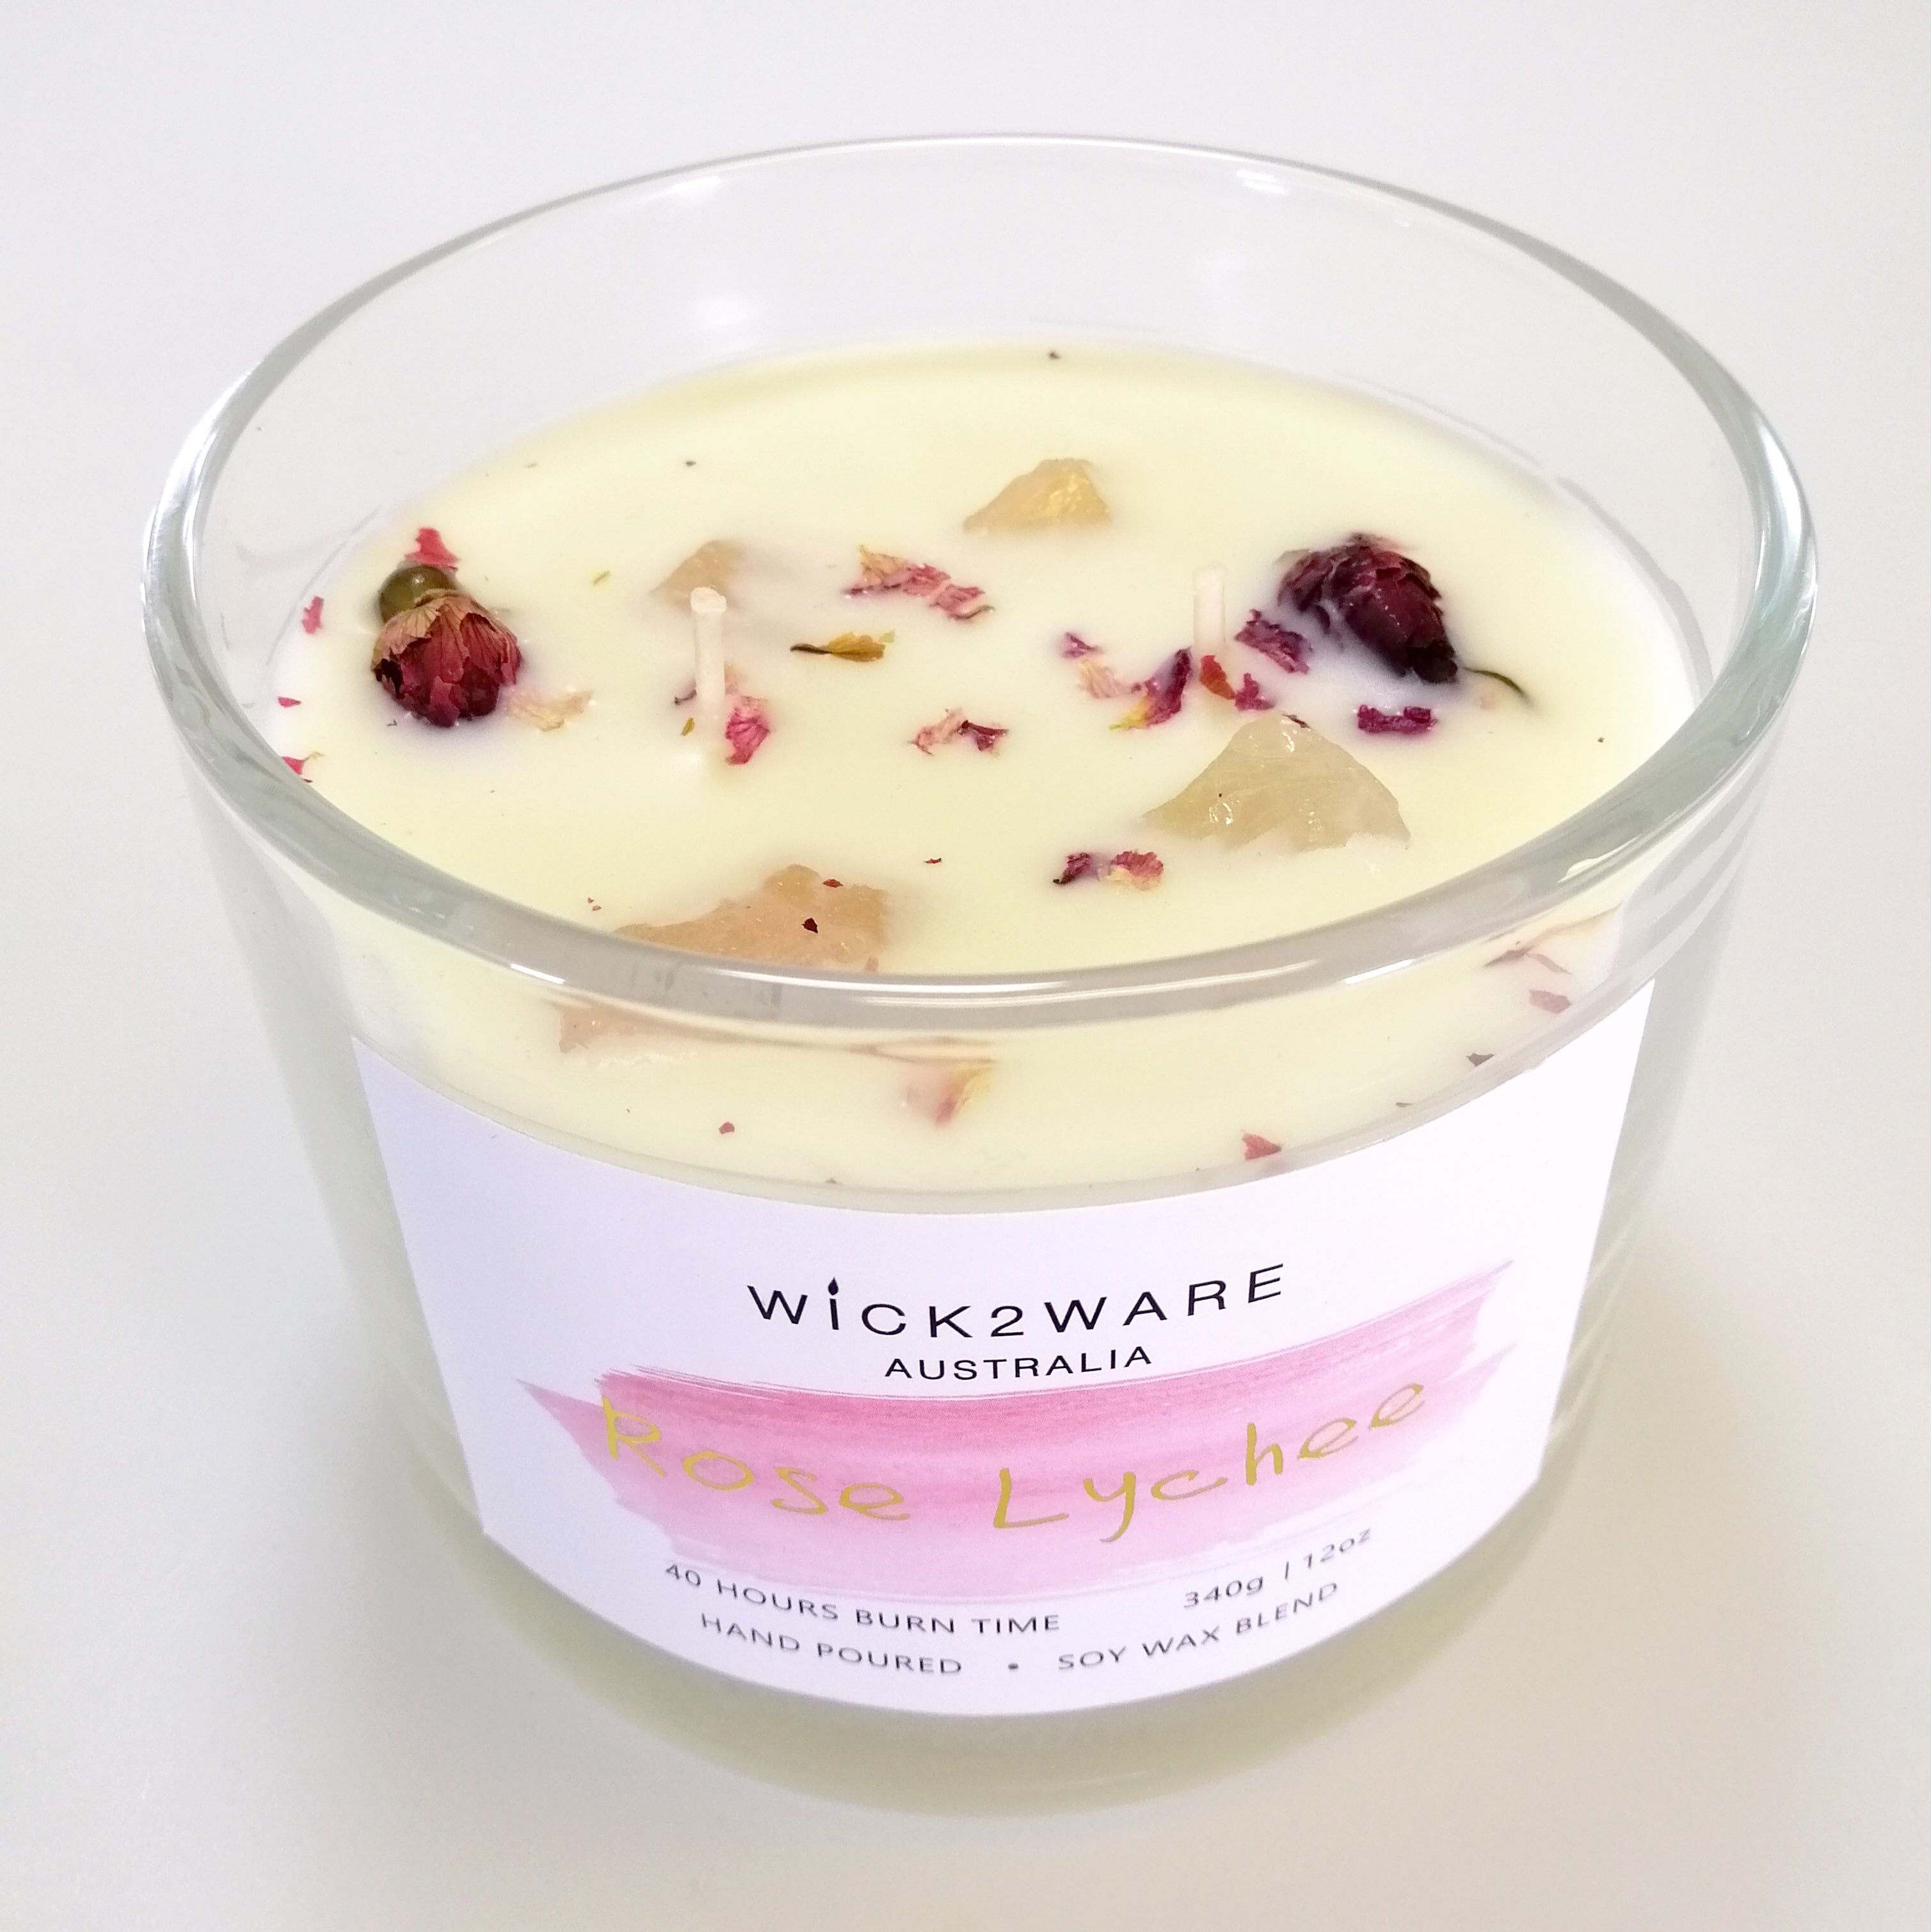 Hand-Poured Soy Wax Crystal Candle - Rose Lychee